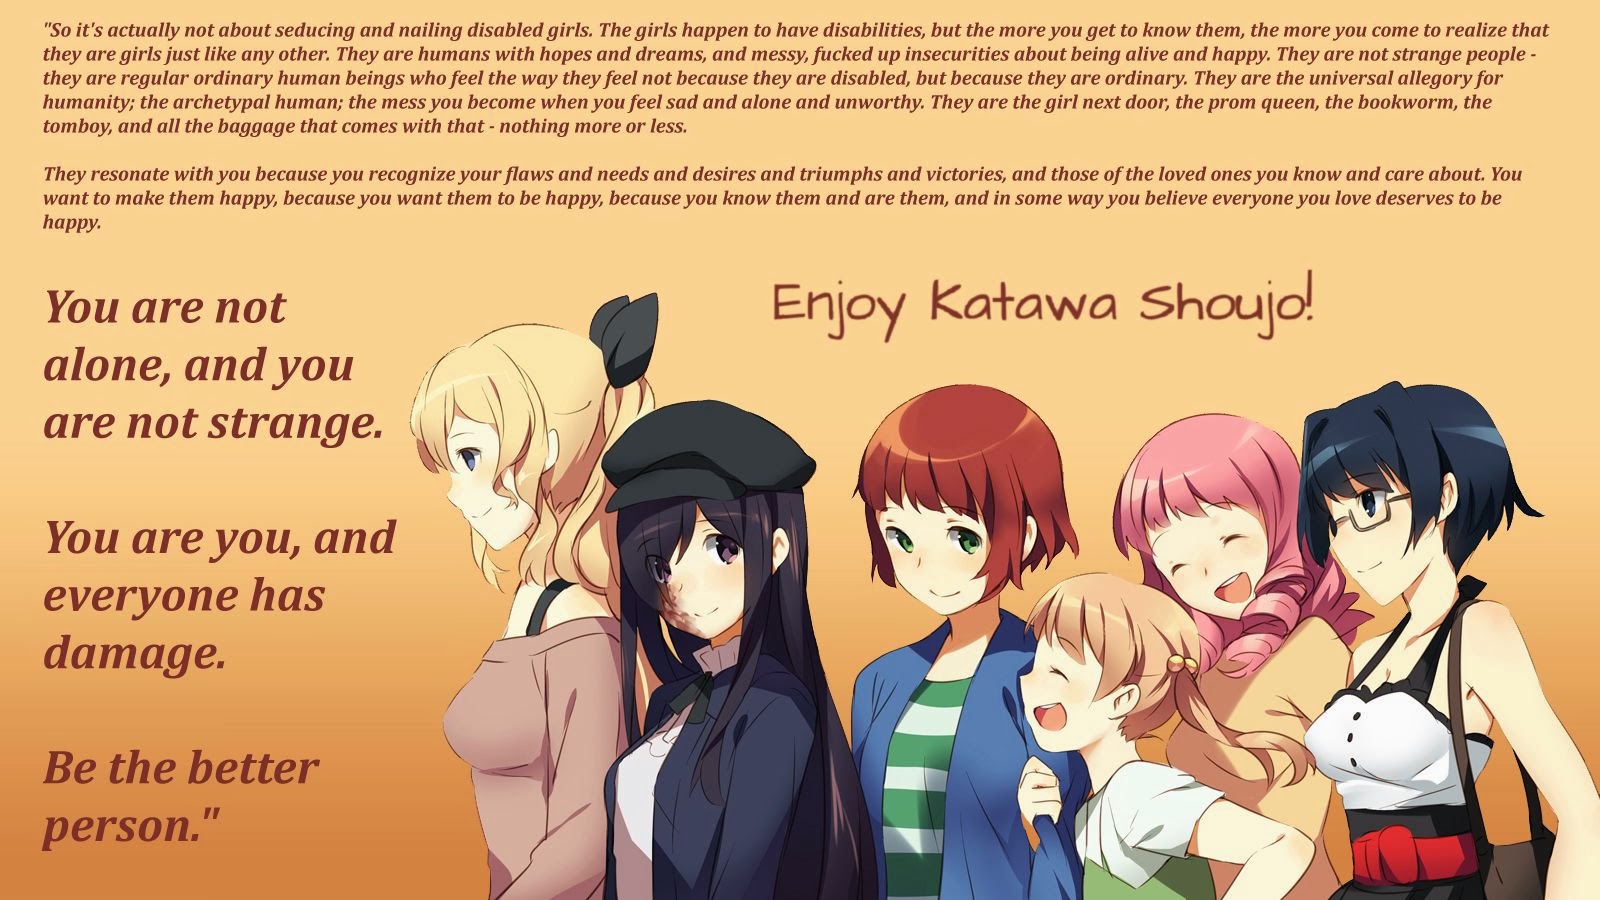 The Bottom Feeder Katawa Shoujo, Sex Stuff in Games, and Choosing What You Are Allowed To